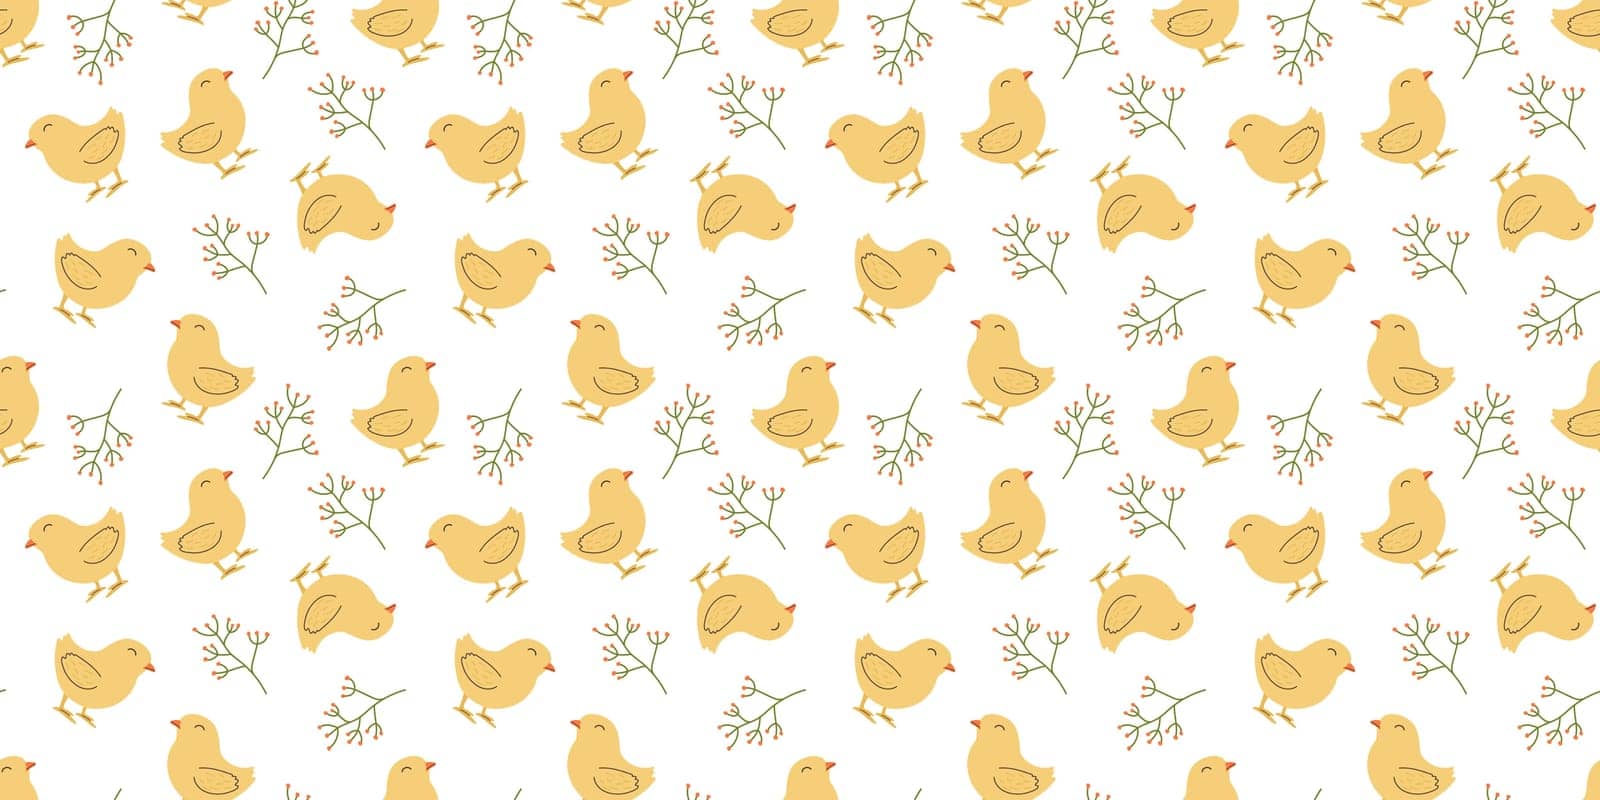 Seamless pattern with Chicken and flowers. Easter design for wrapping paper and backgrounds. Hand drawn illustration of Chick bird in kawaii style by Zhizhi